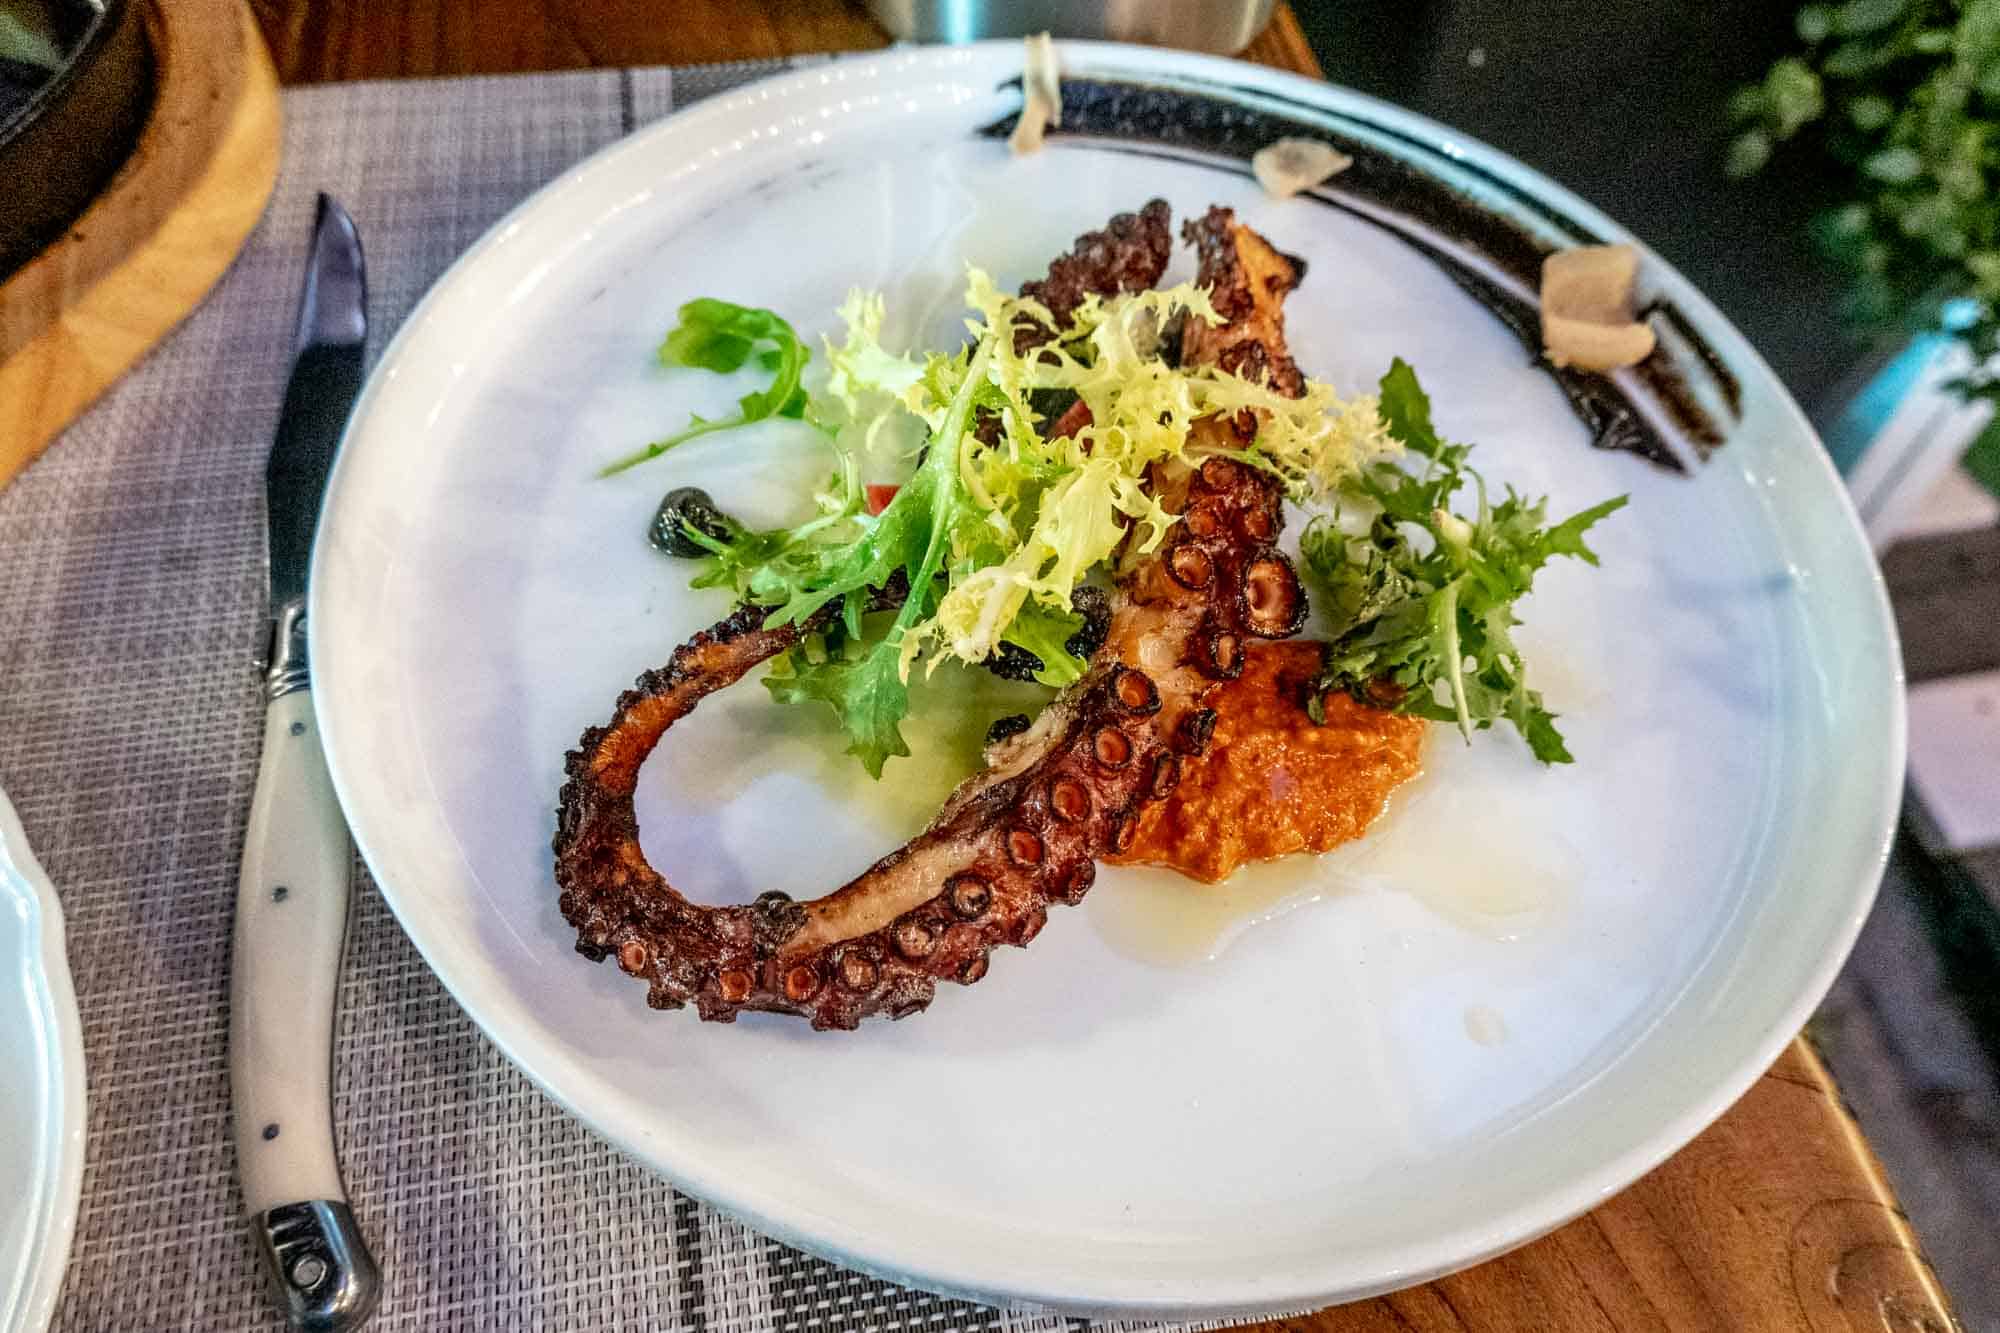 Octopus tentacle on plate with tapenade and lettuce